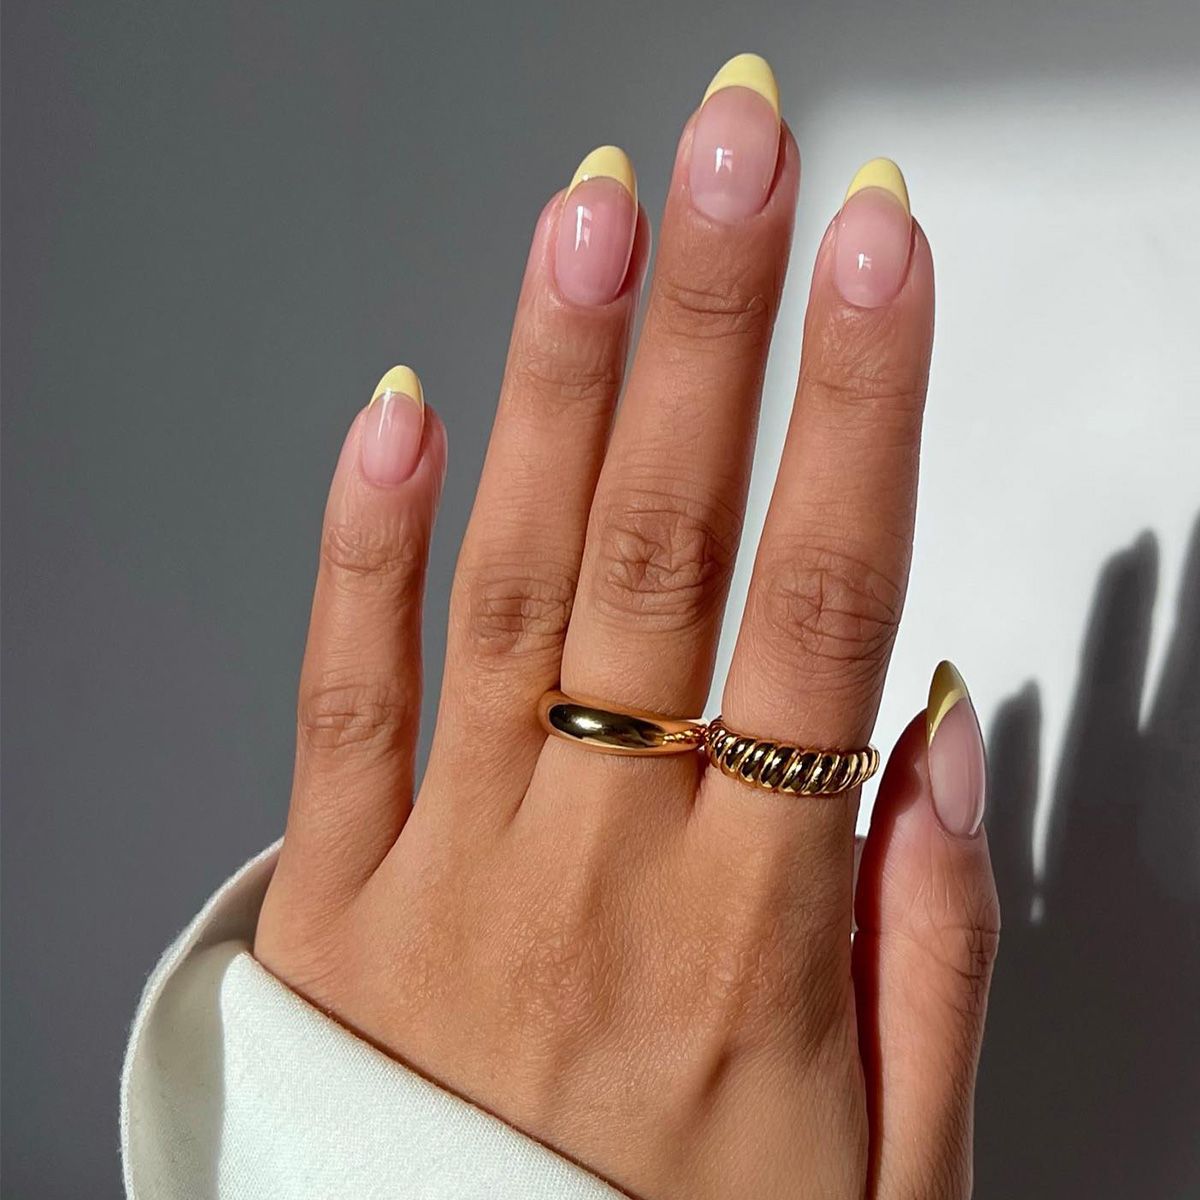 Butter Nails Is the Chic Manicure Trend Everyone’s Suddenly Searching for